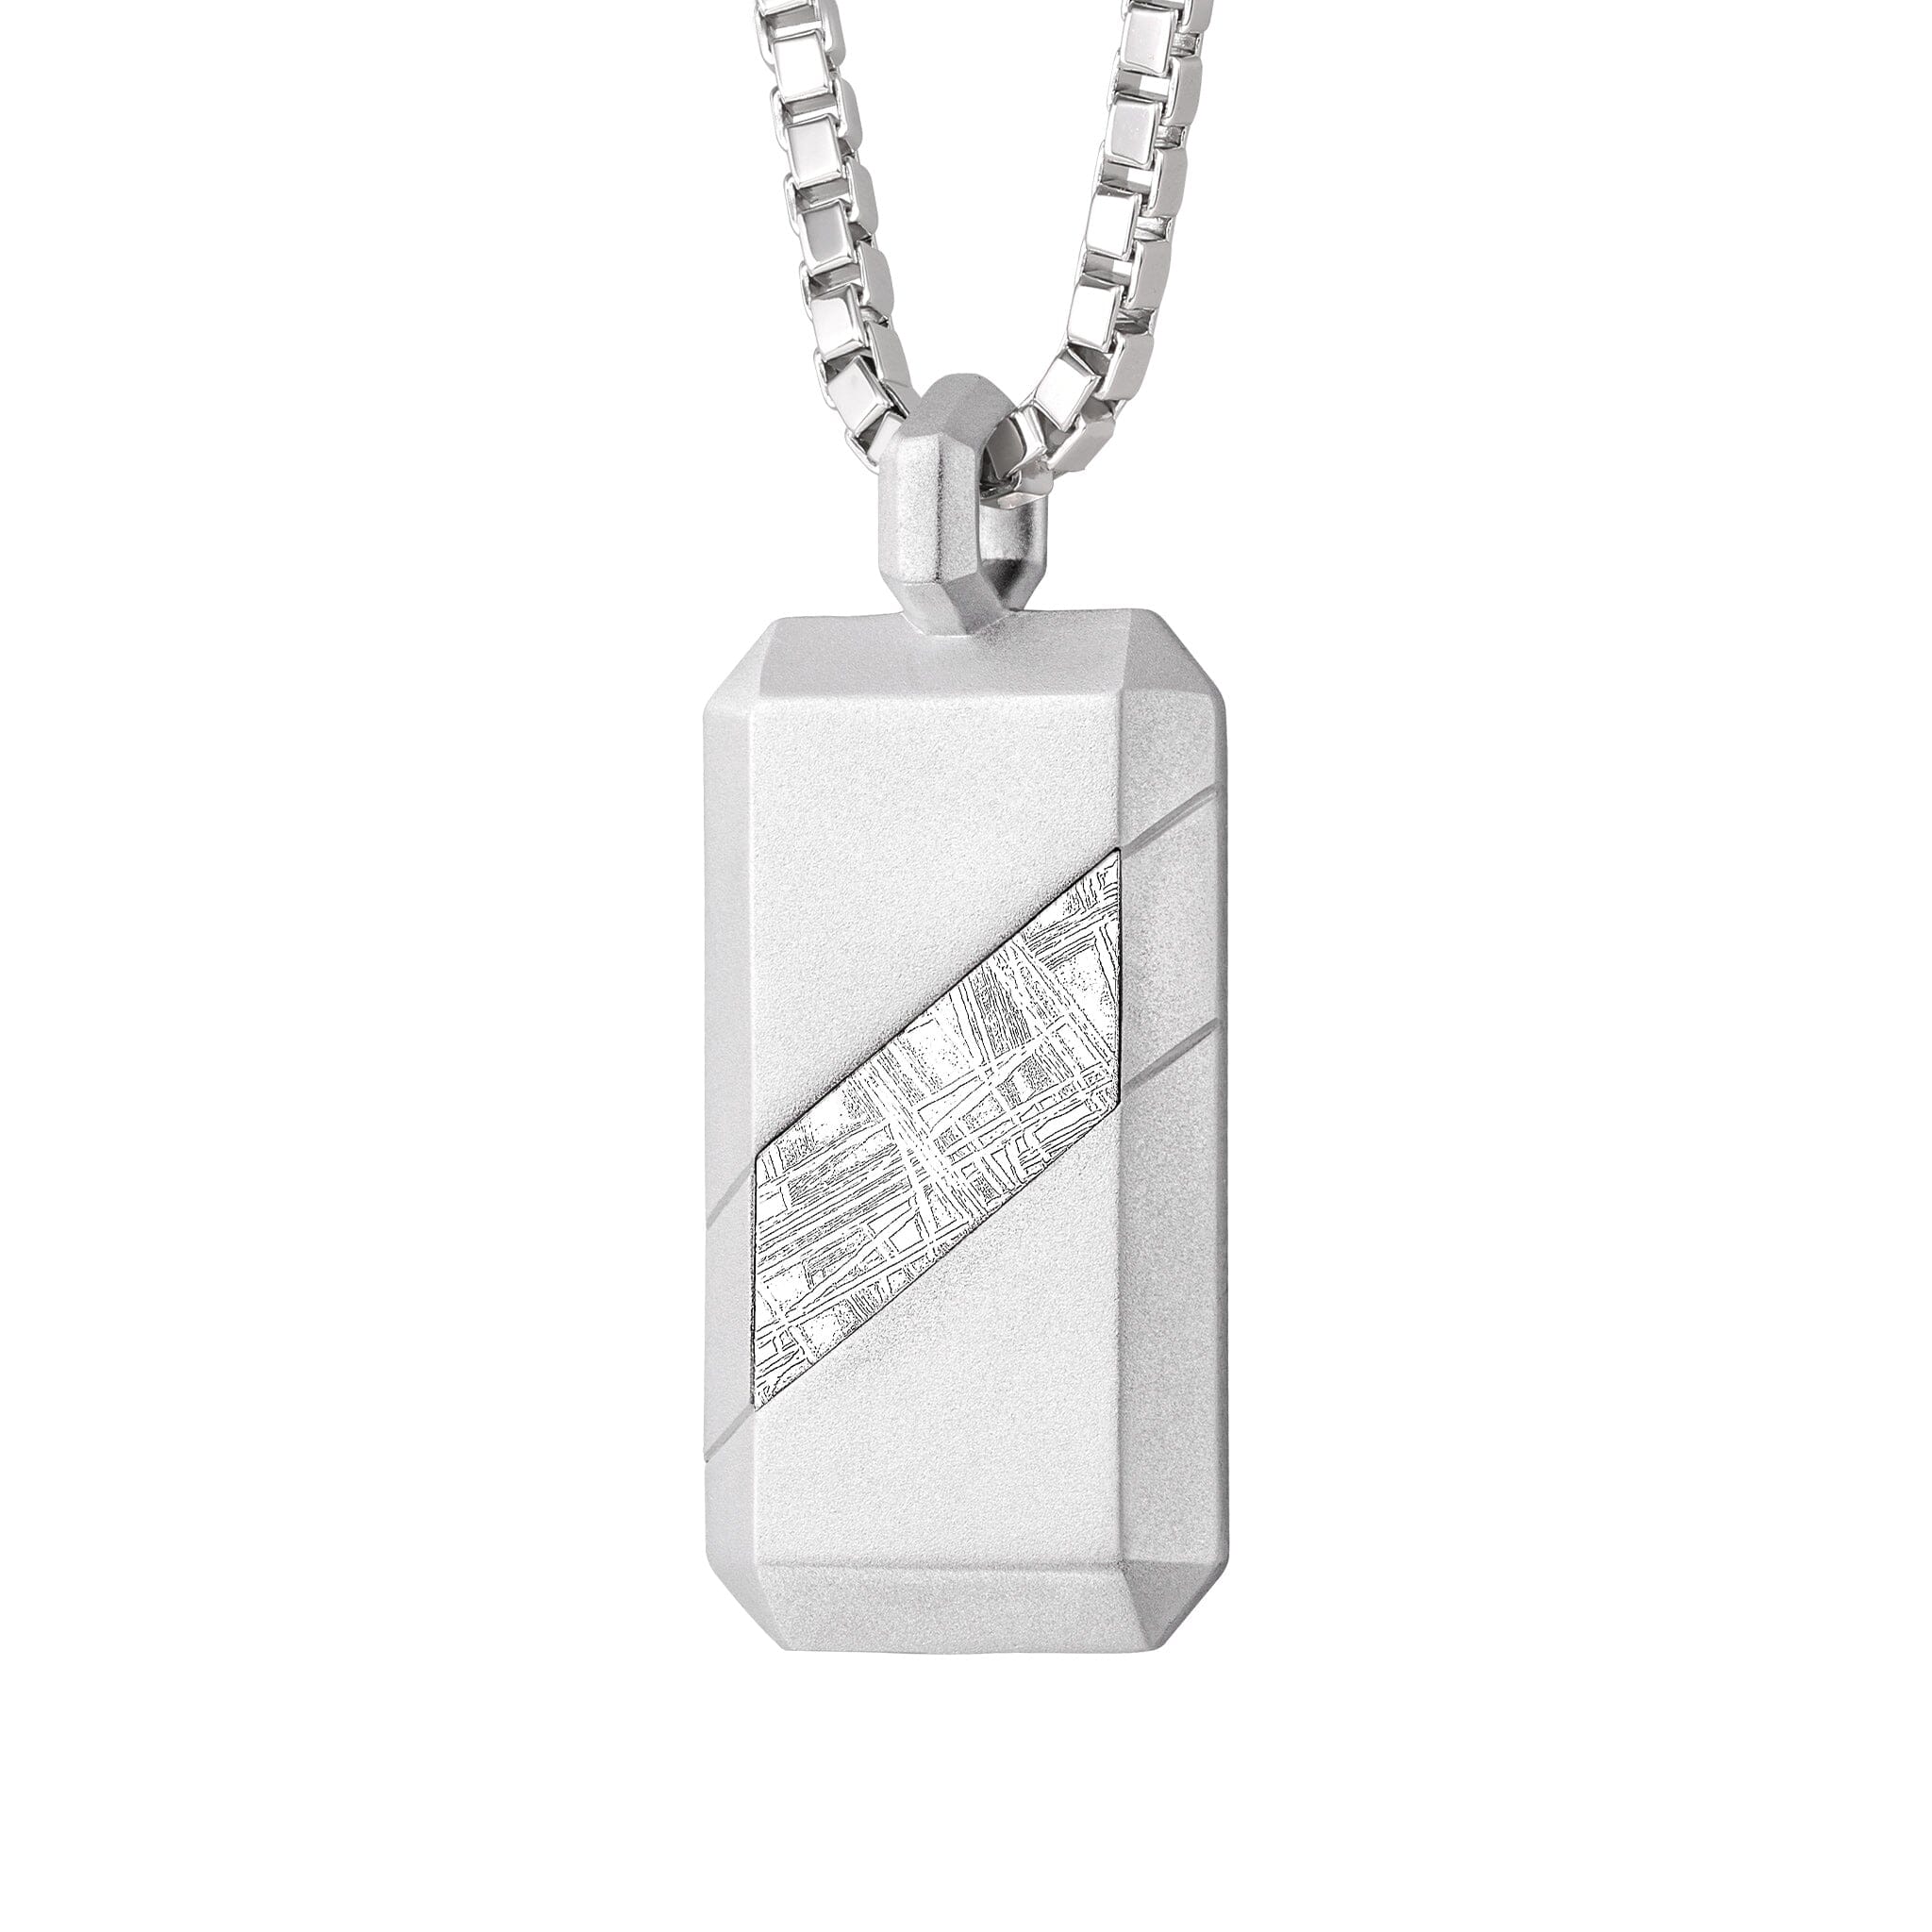 Men's Dog Tag Necklace with Meteorite Necklaces WAA FASHION GROUP 